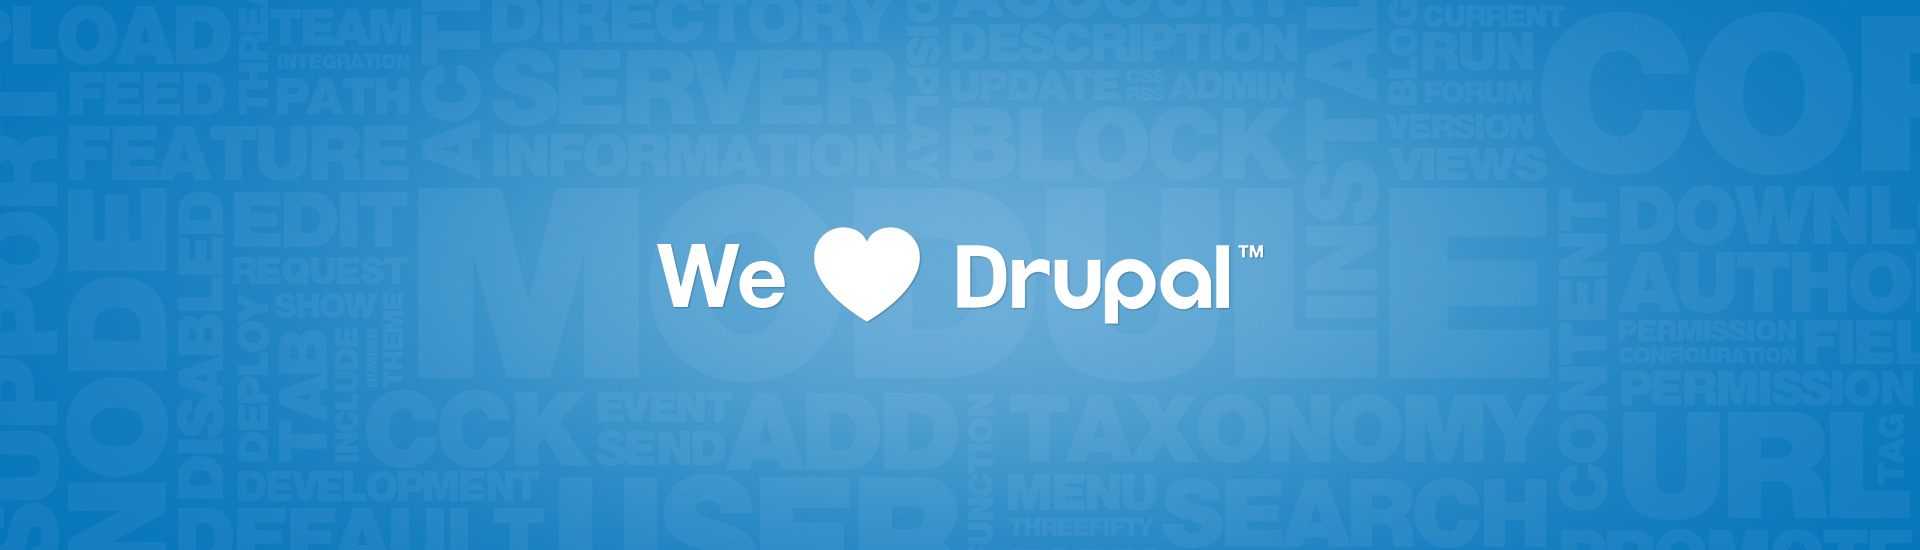 Toronto Ontario Drupal Services by Web Value Agency